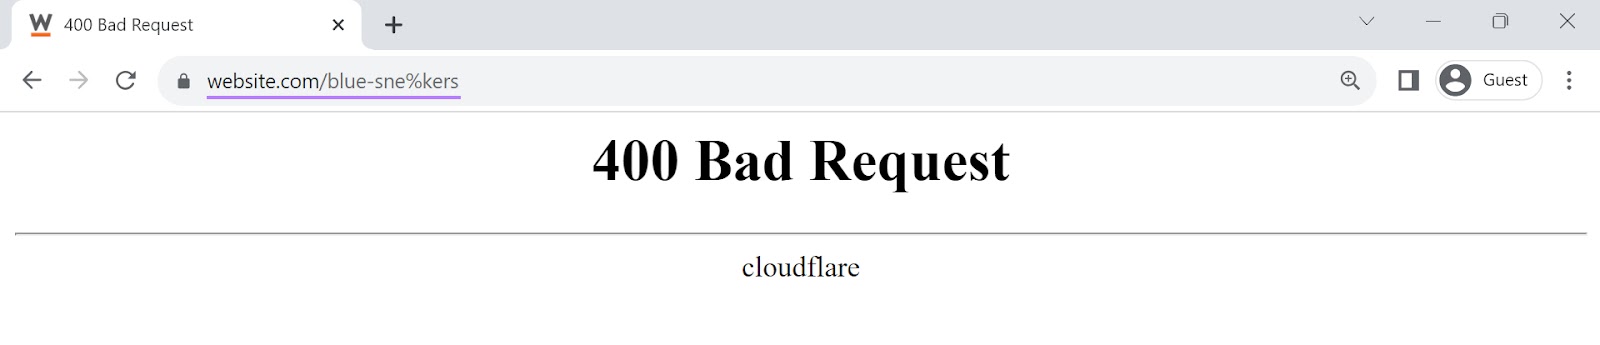 A 400 bad request error page